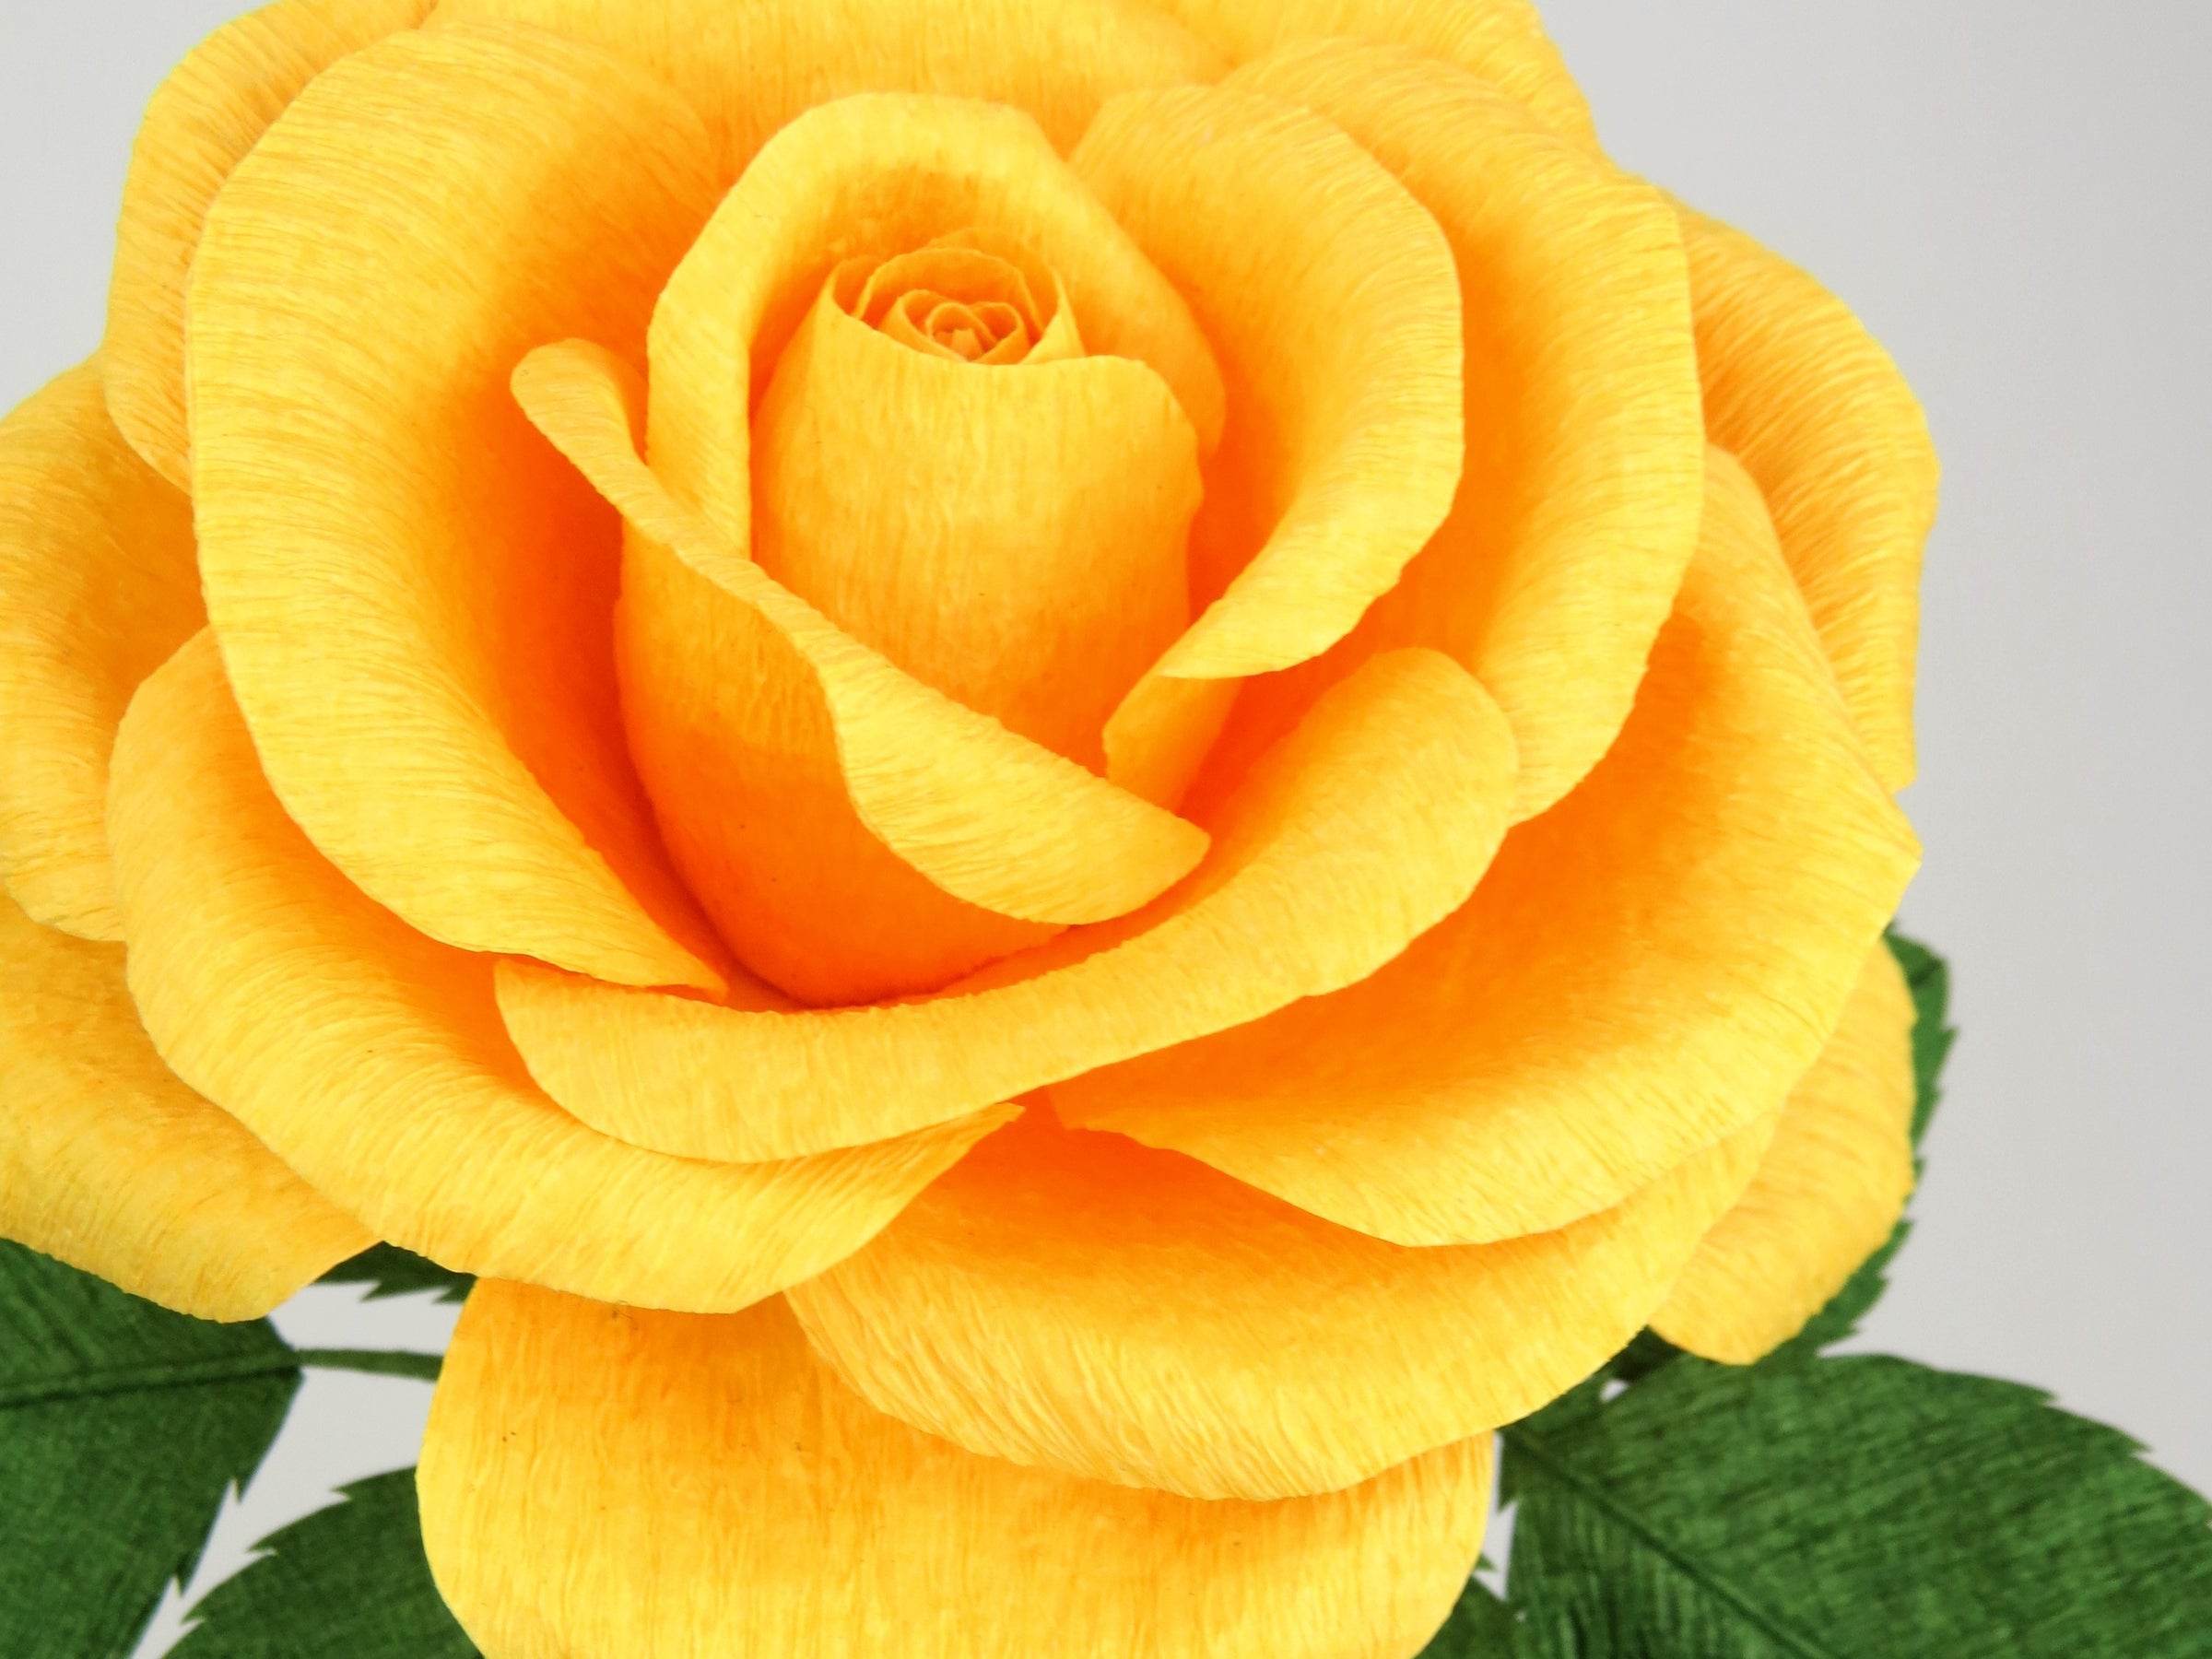 Close up detail of the texture on the petals of a bright yellow paper rose